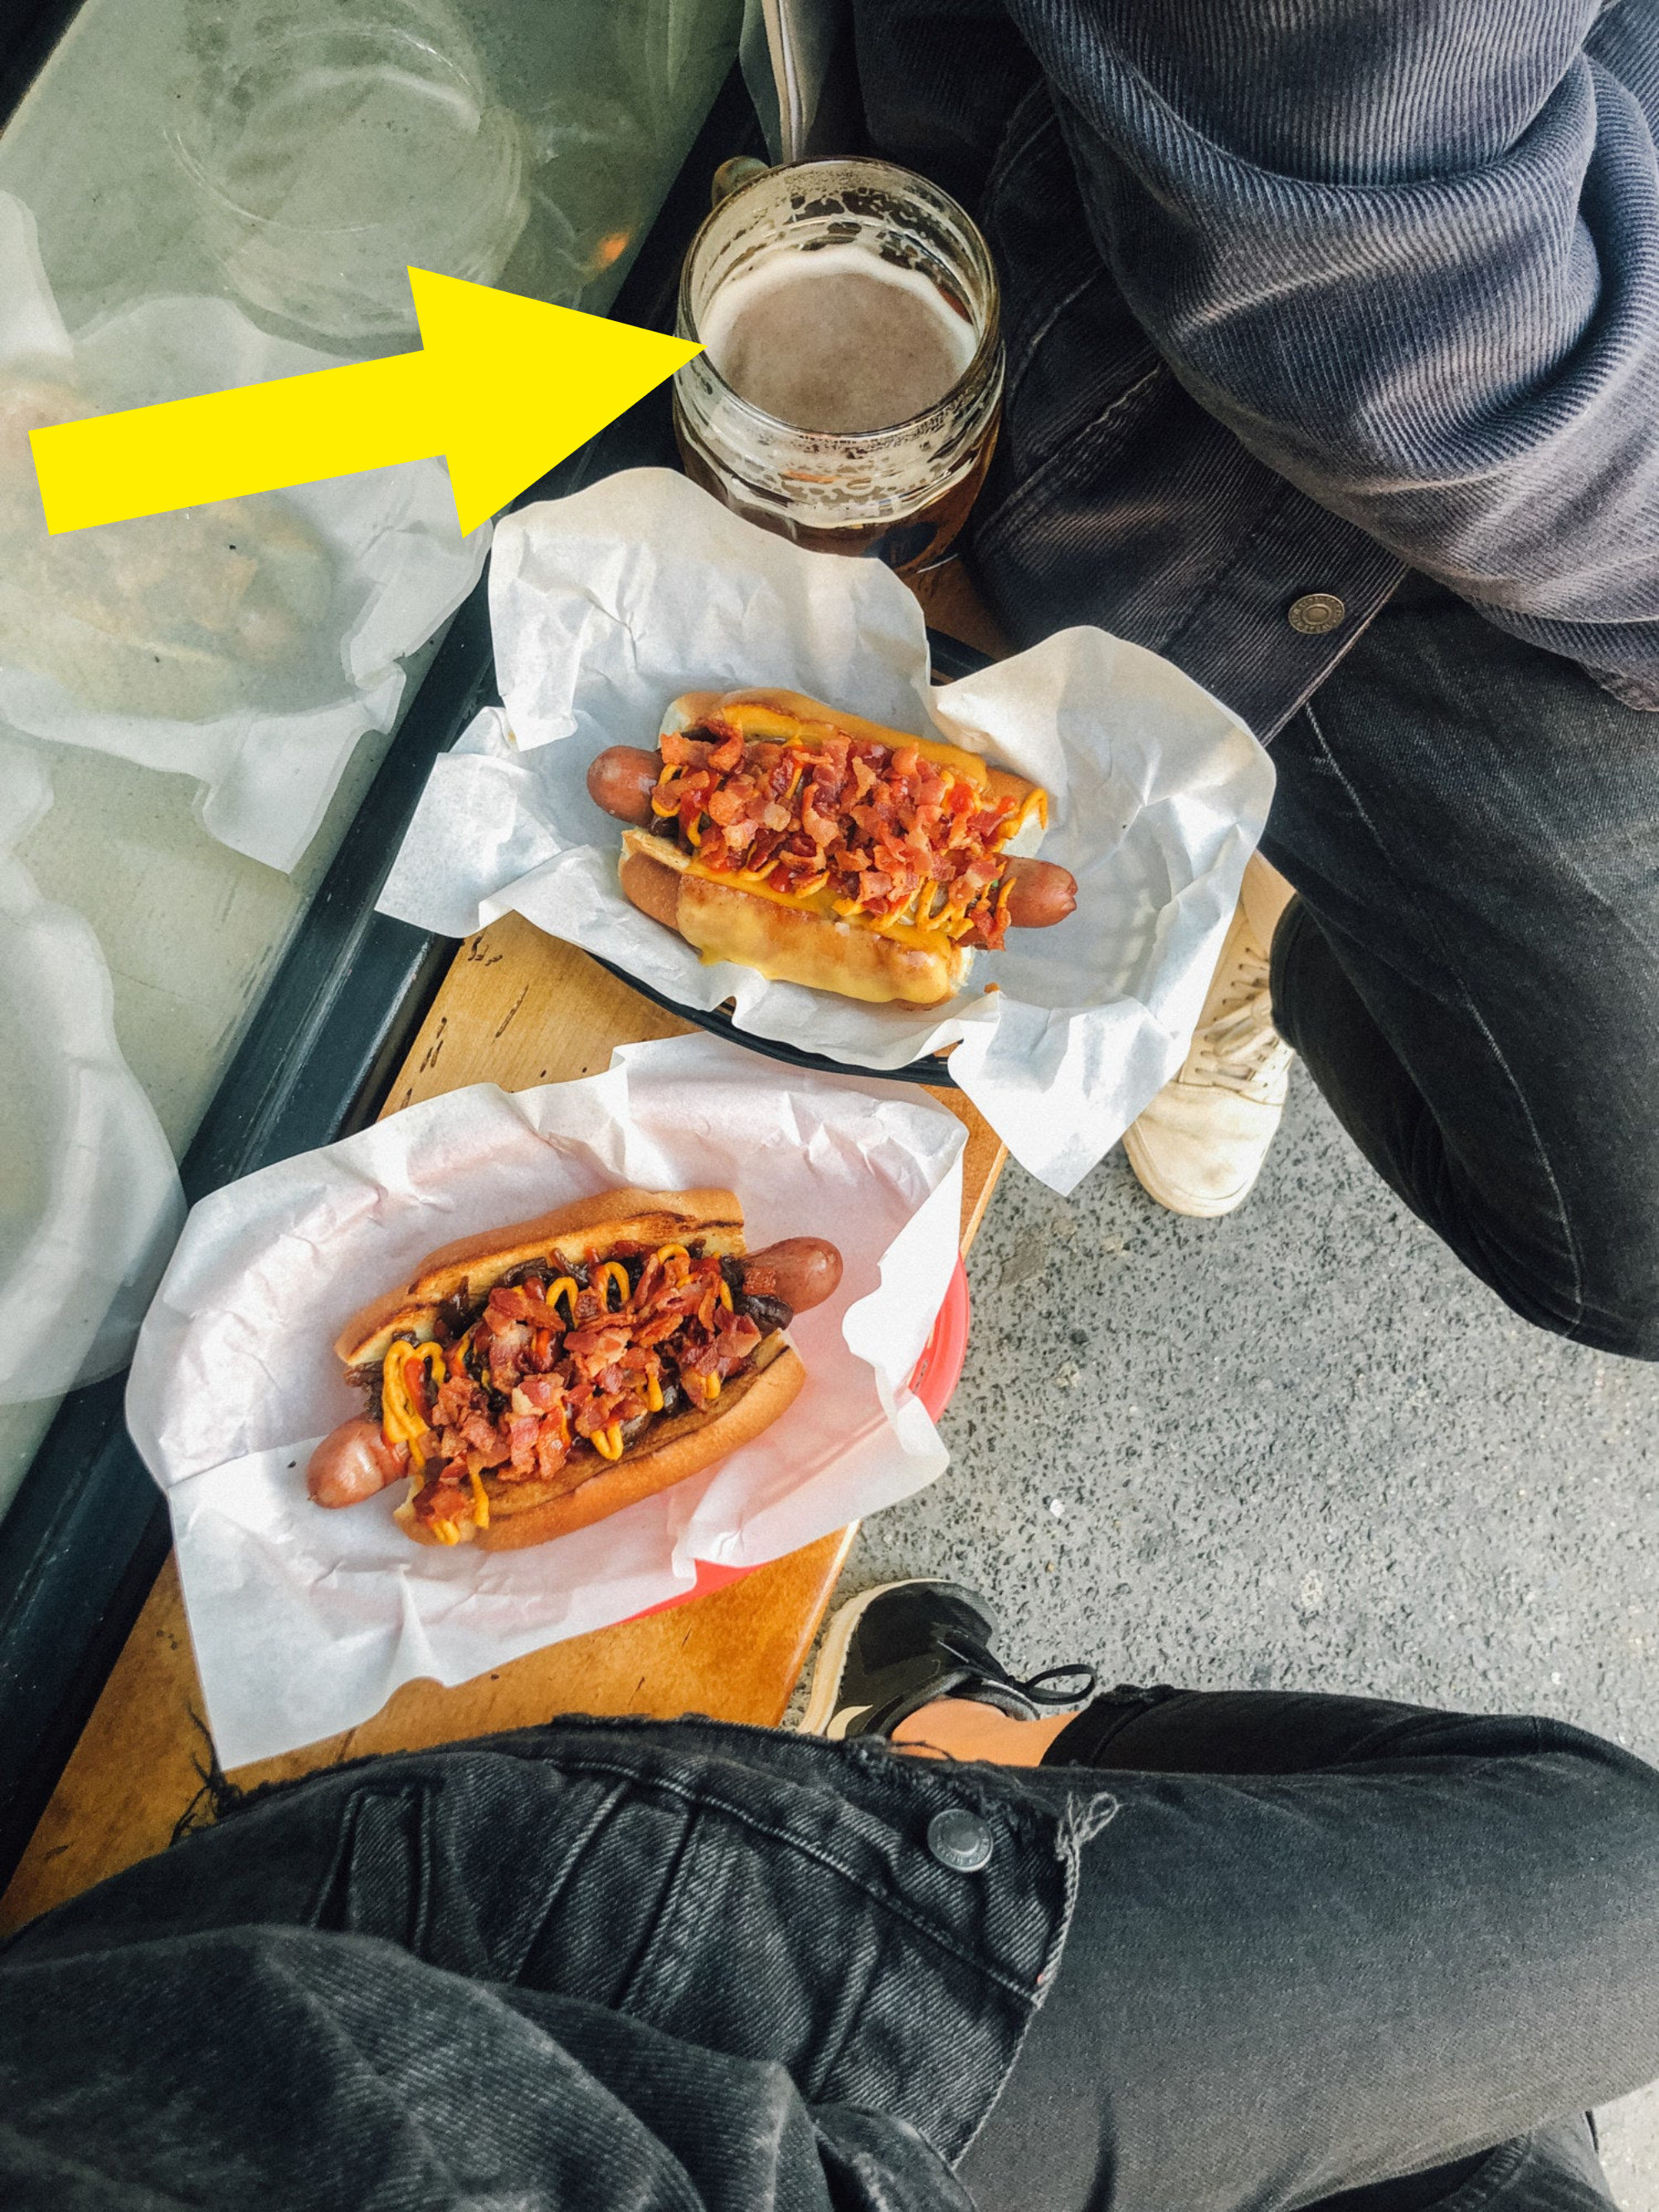 Hot dogs and beer.